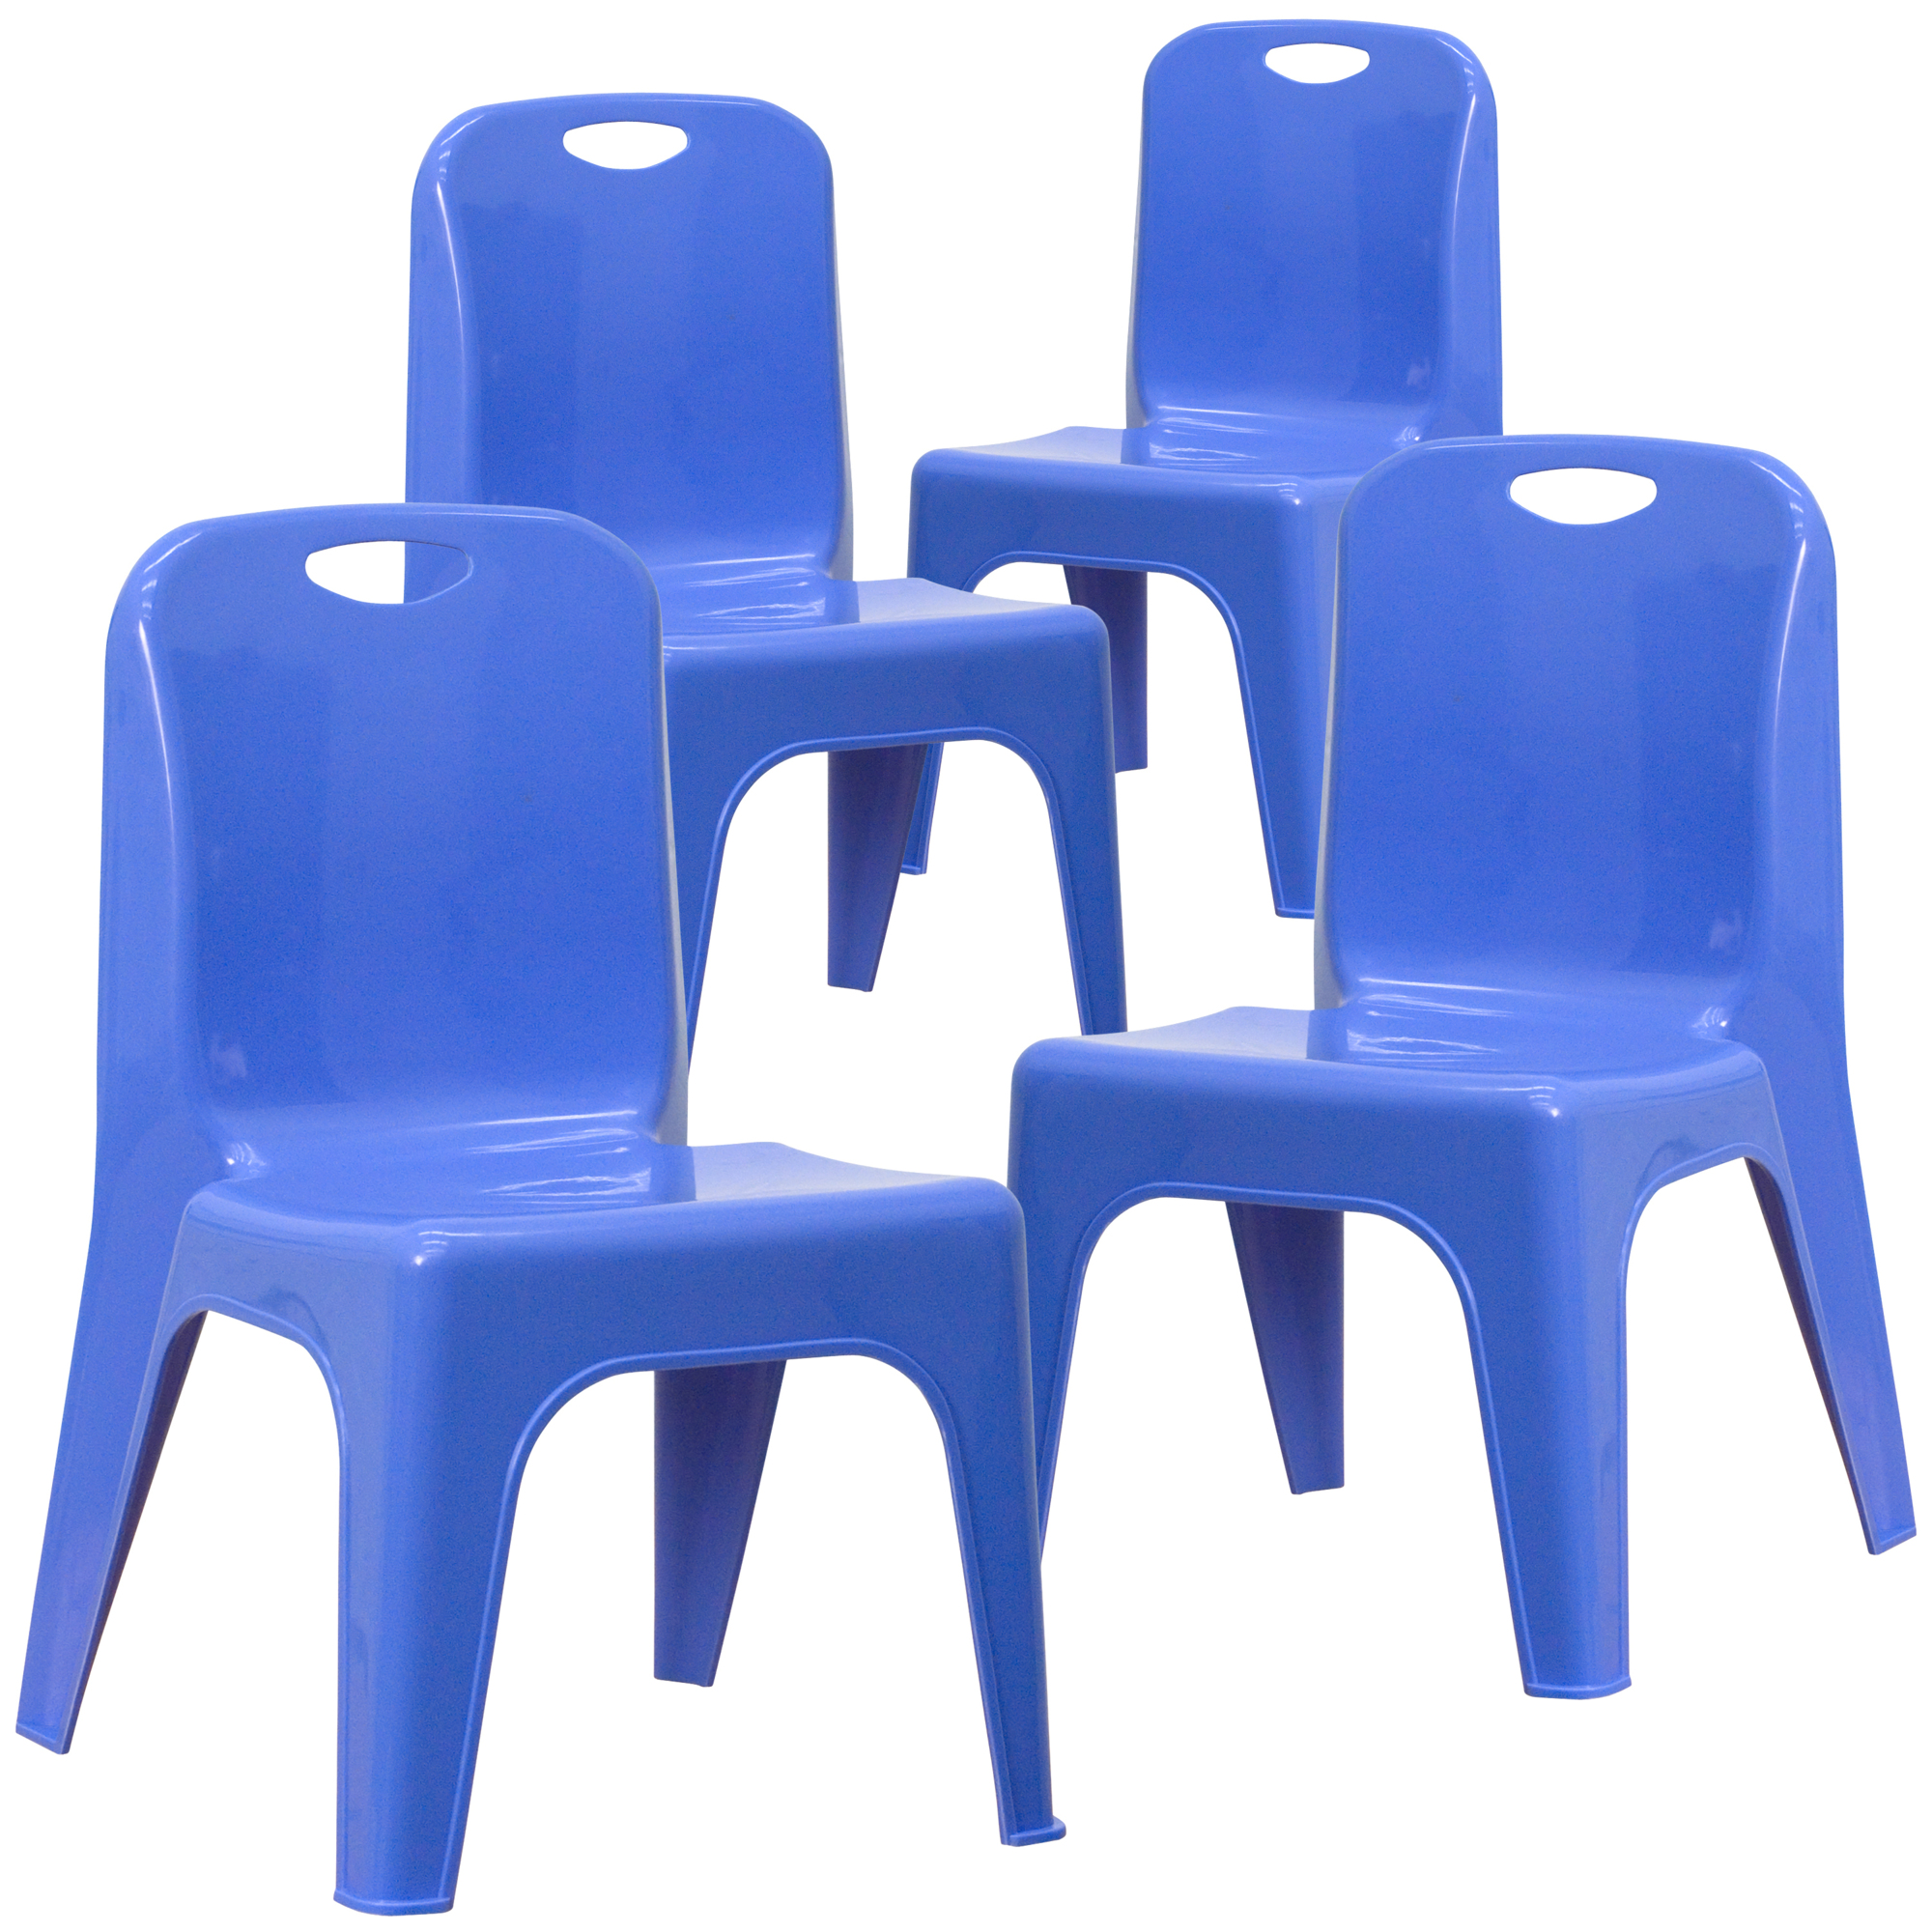 Flash Furniture, 4 Pack Blue Plastic School Chair-11Inch H Seat, Primary Color Blue, Included (qty.) 4, Model 4YUYCX4011BLUE